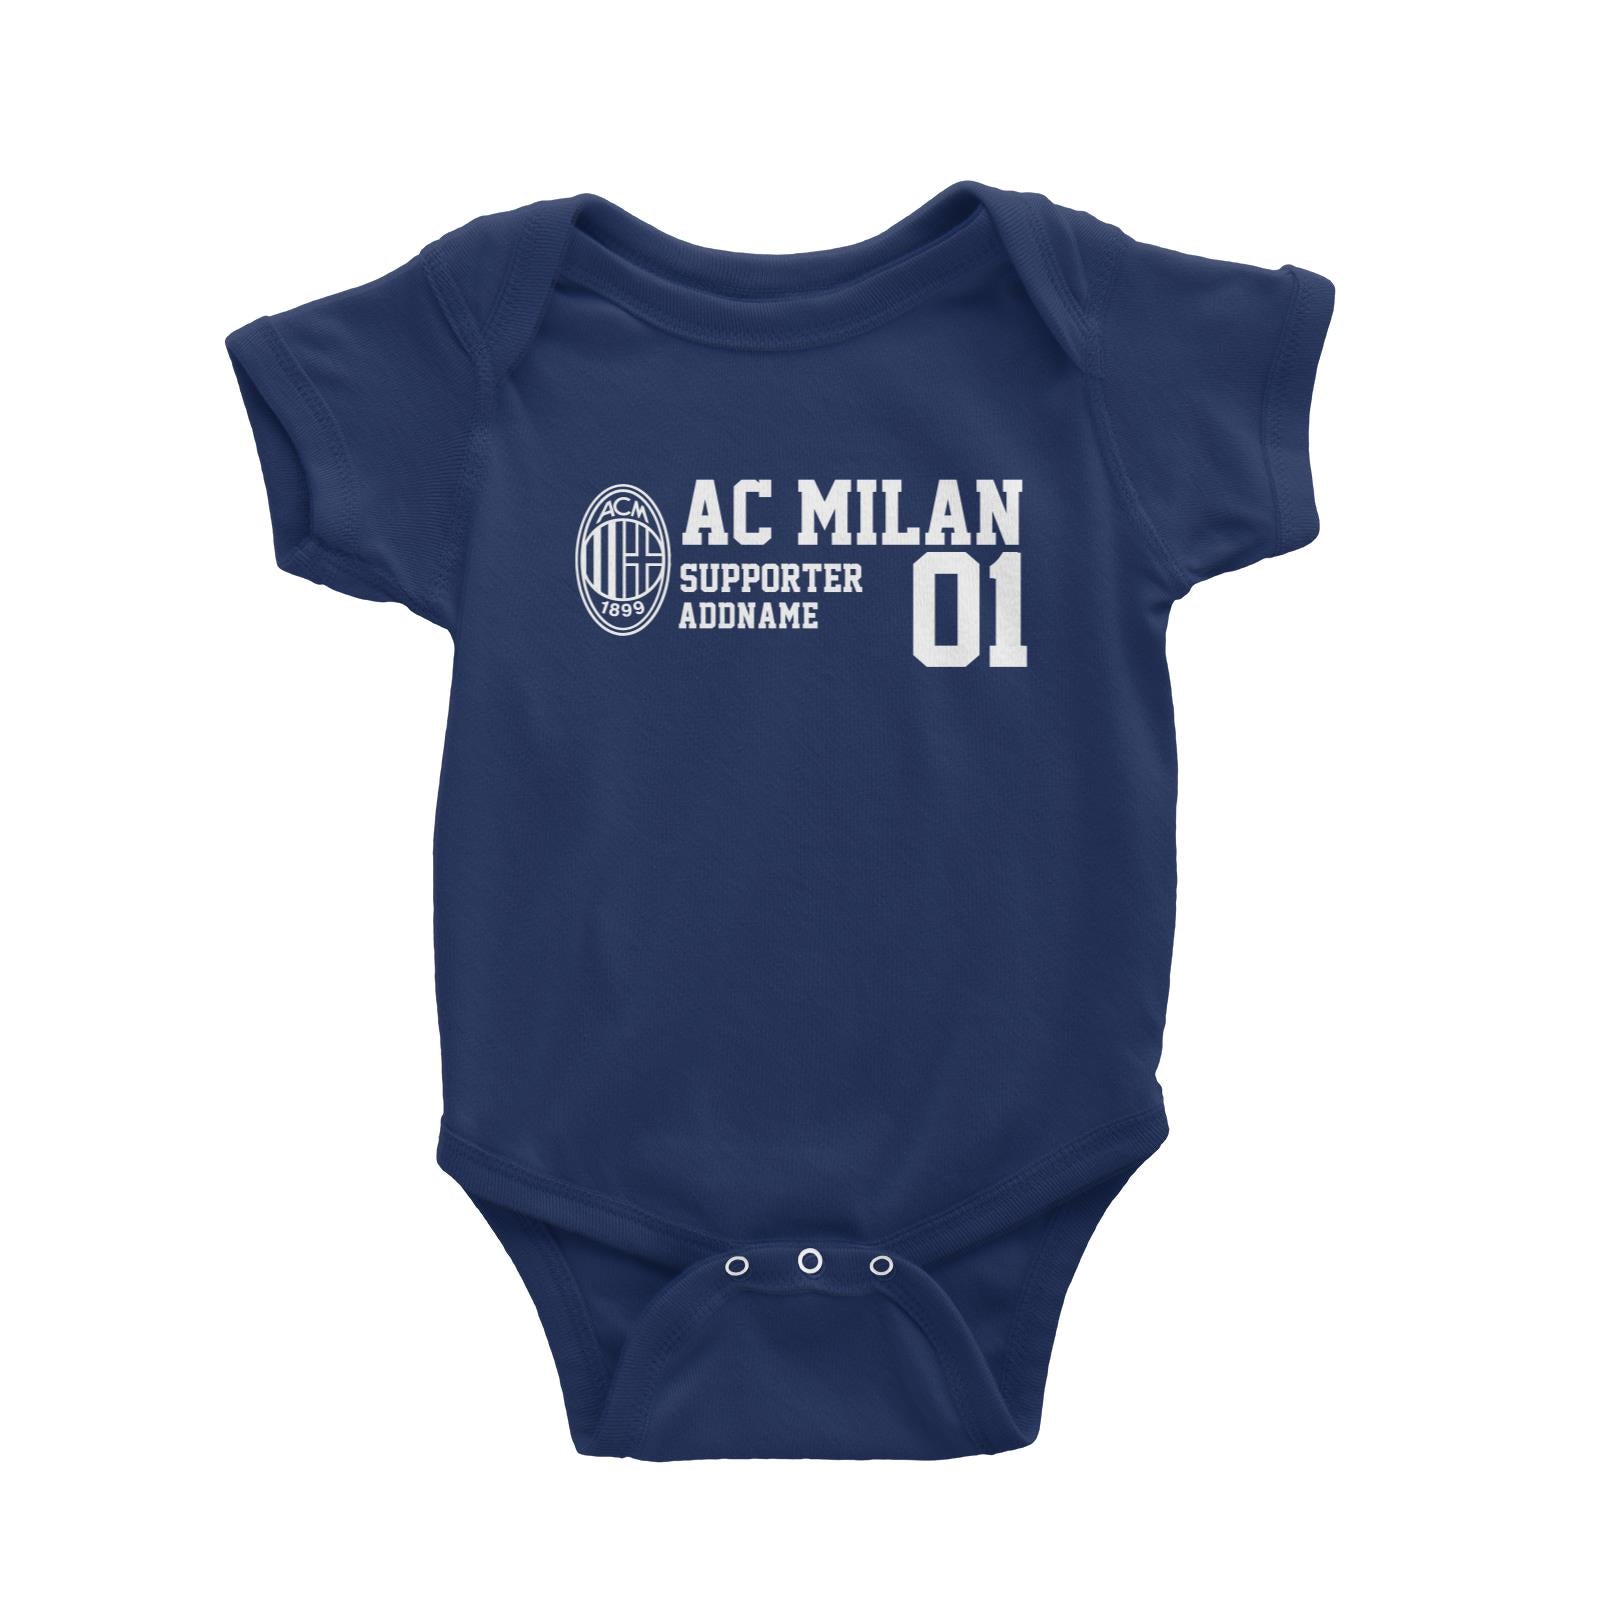 AC Milan Football Supporter Addname Baby Romper